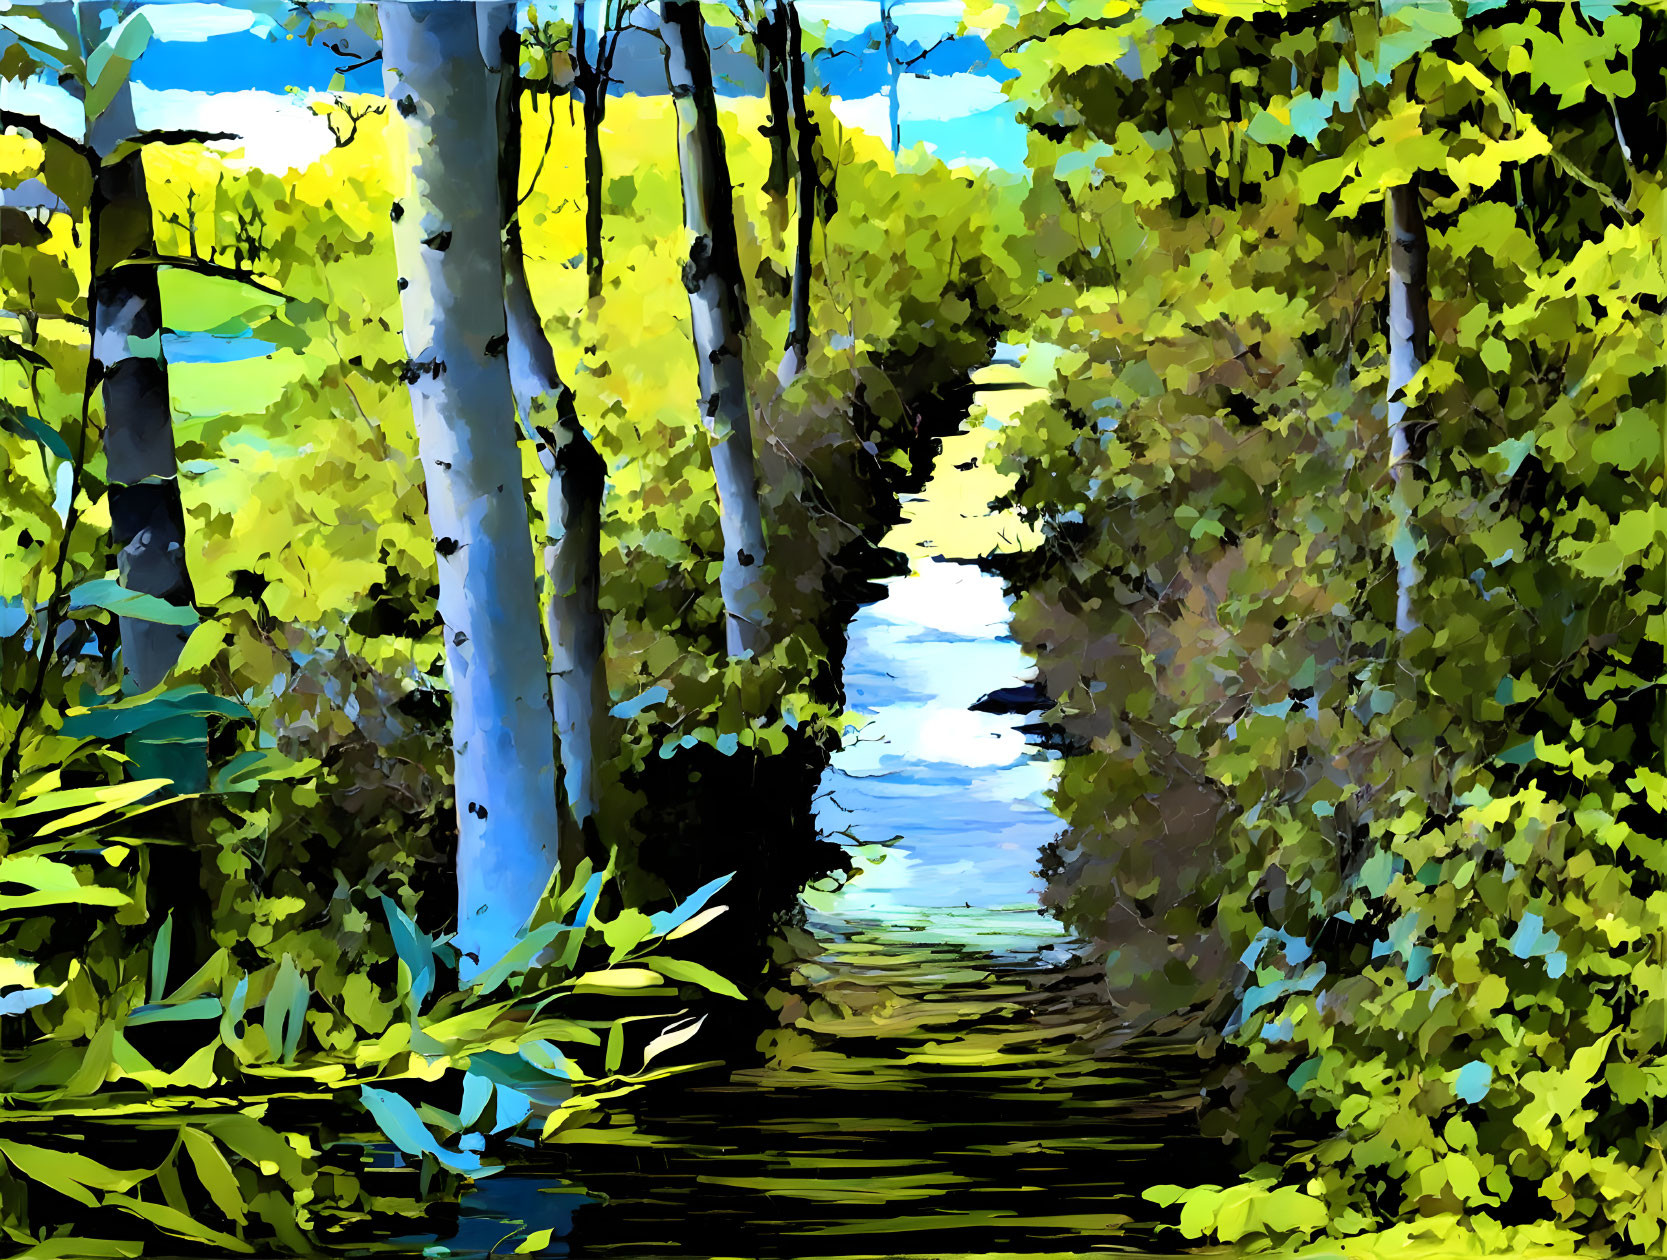 Digital painting of forest path to sunlit clearing surrounded by greenery & blue skies